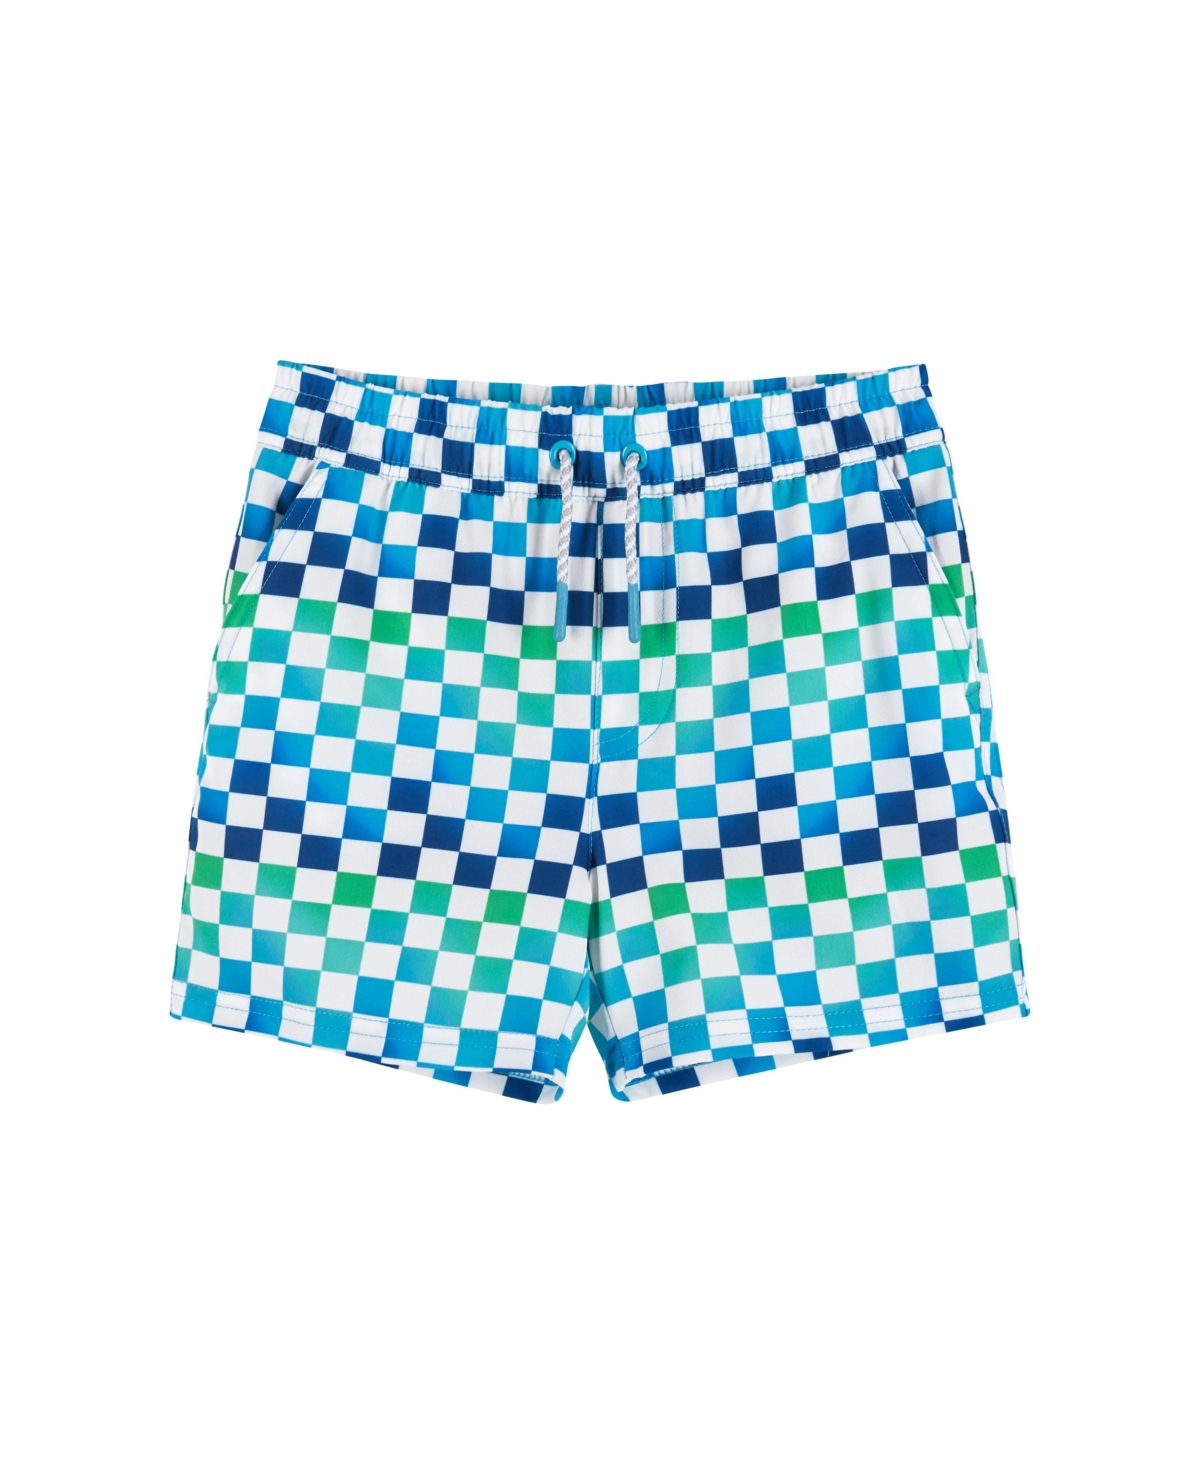 ANDY & EVAN CHILD BOYS OMBRE CHECKER BOARDSHORT W/BUILT-IN COMFORT STRETCH SHORT LINER